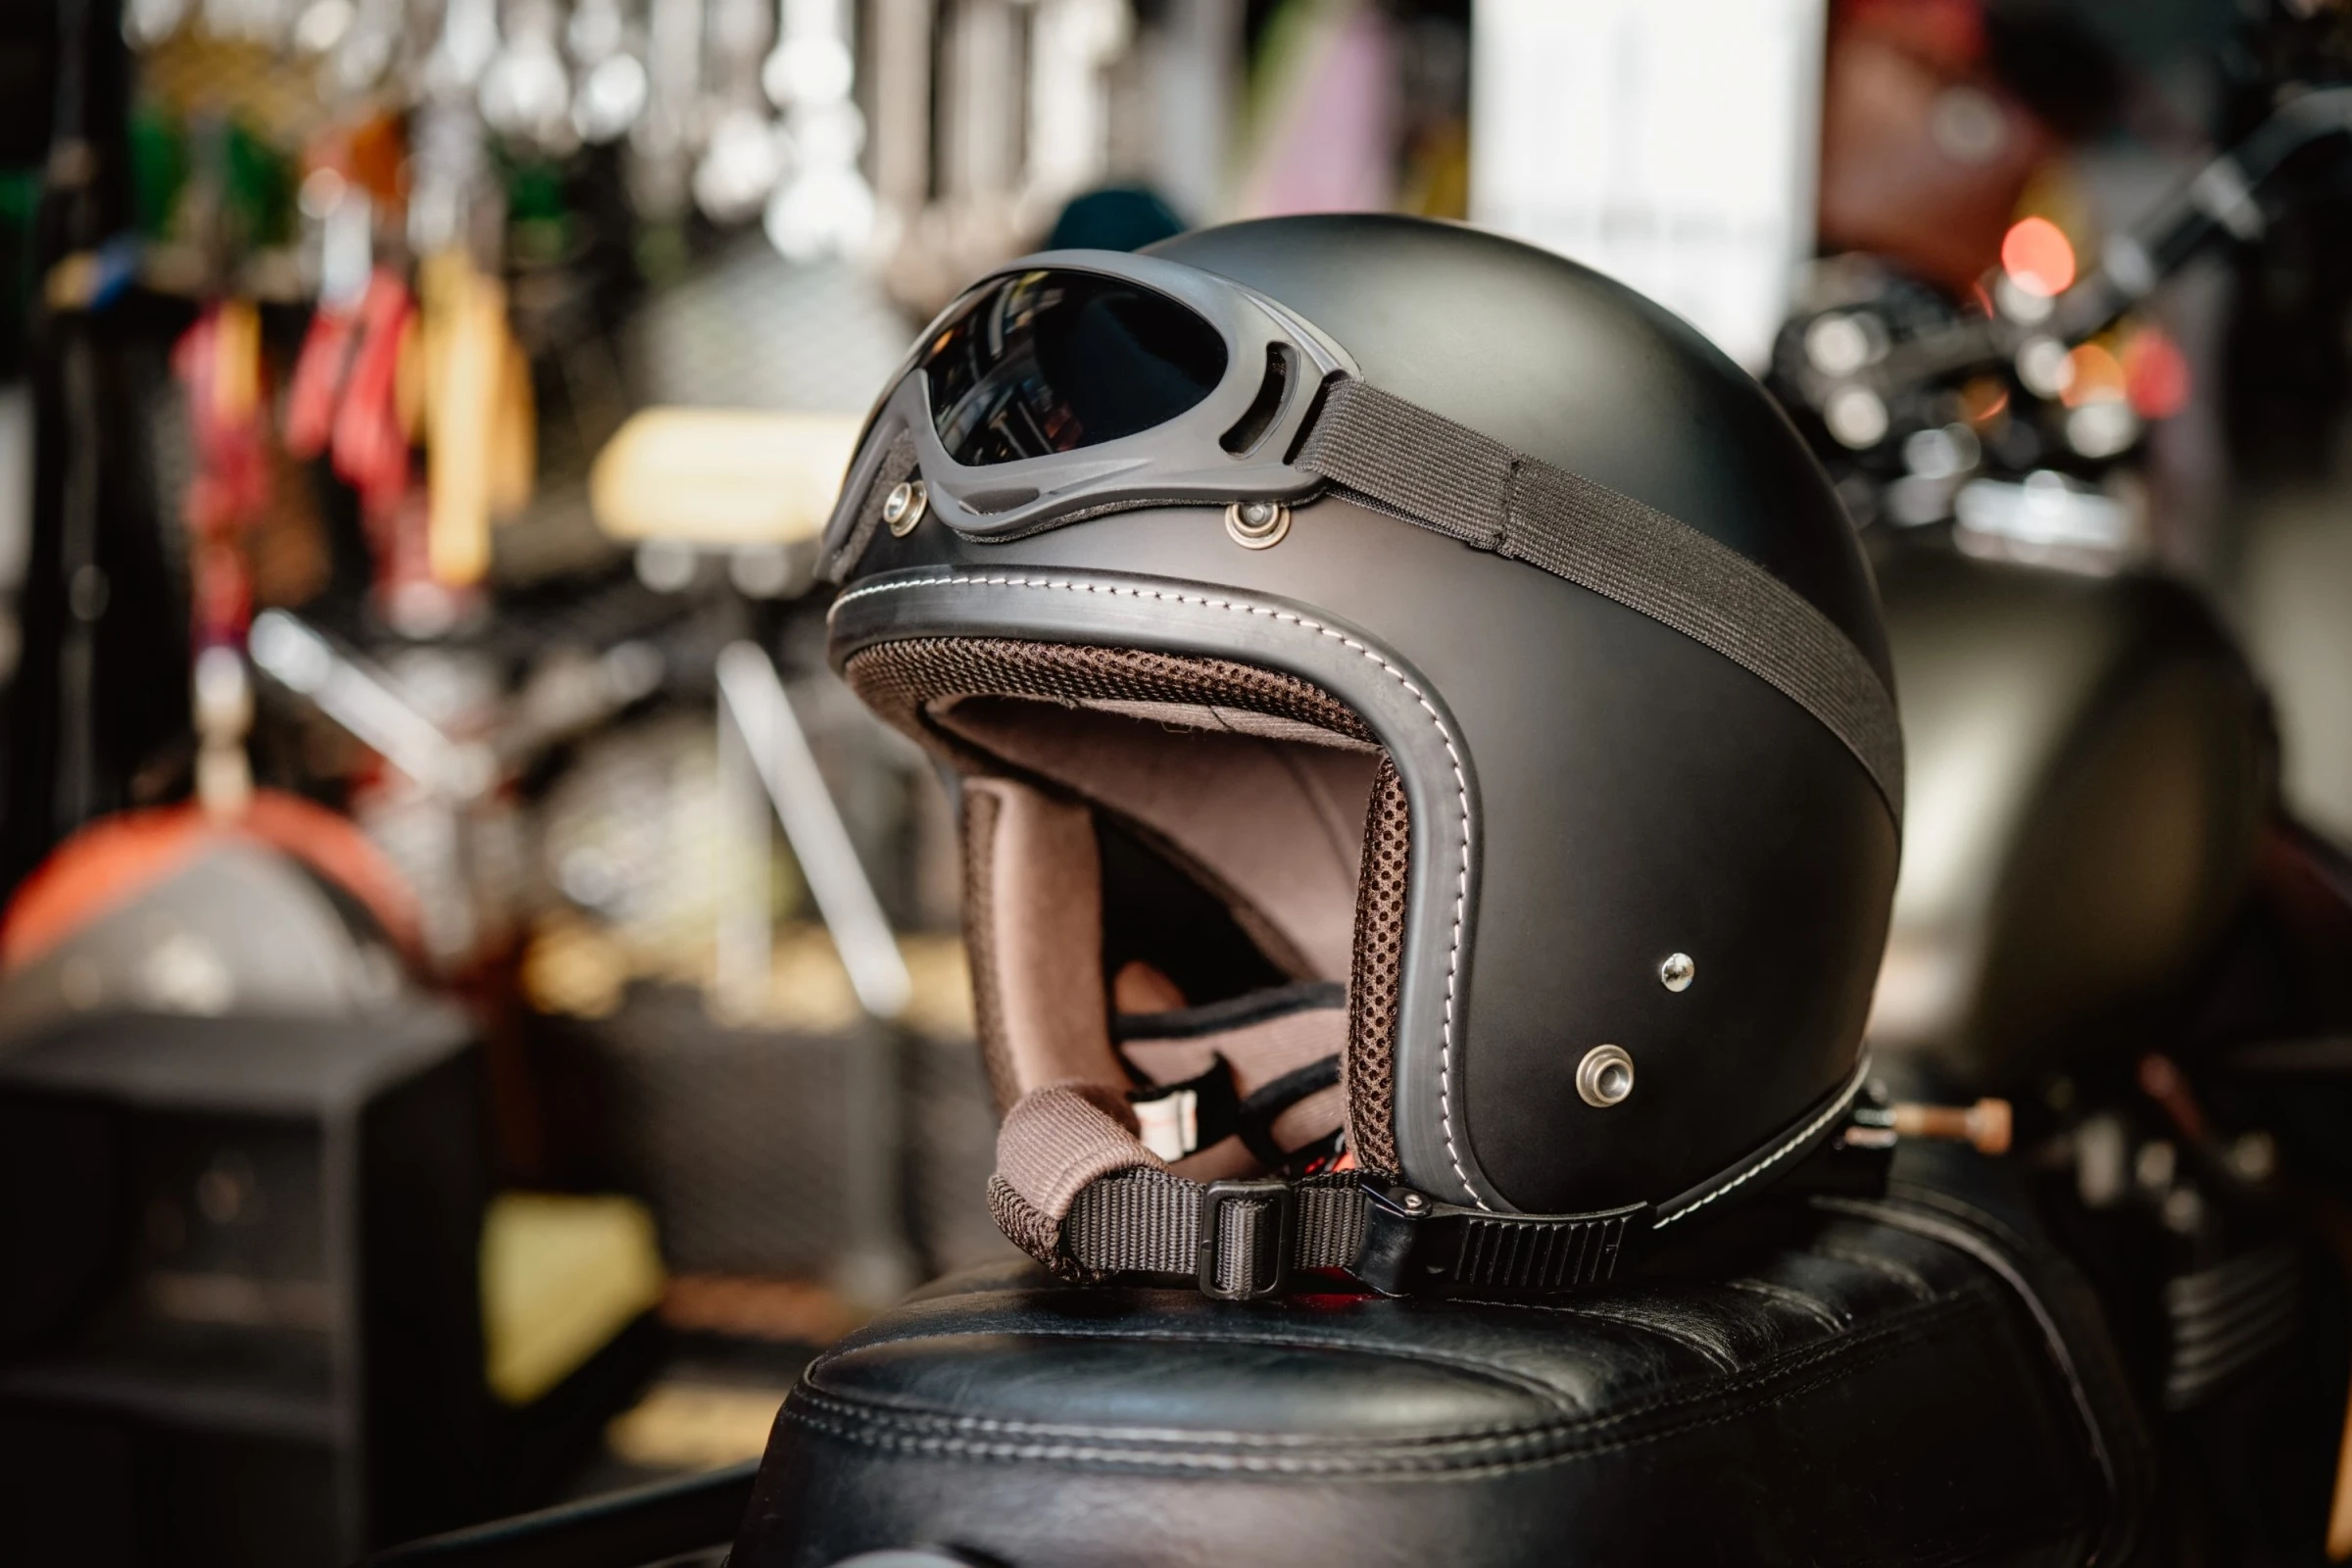 Ten Motorbike Accessories for a Safer Commute